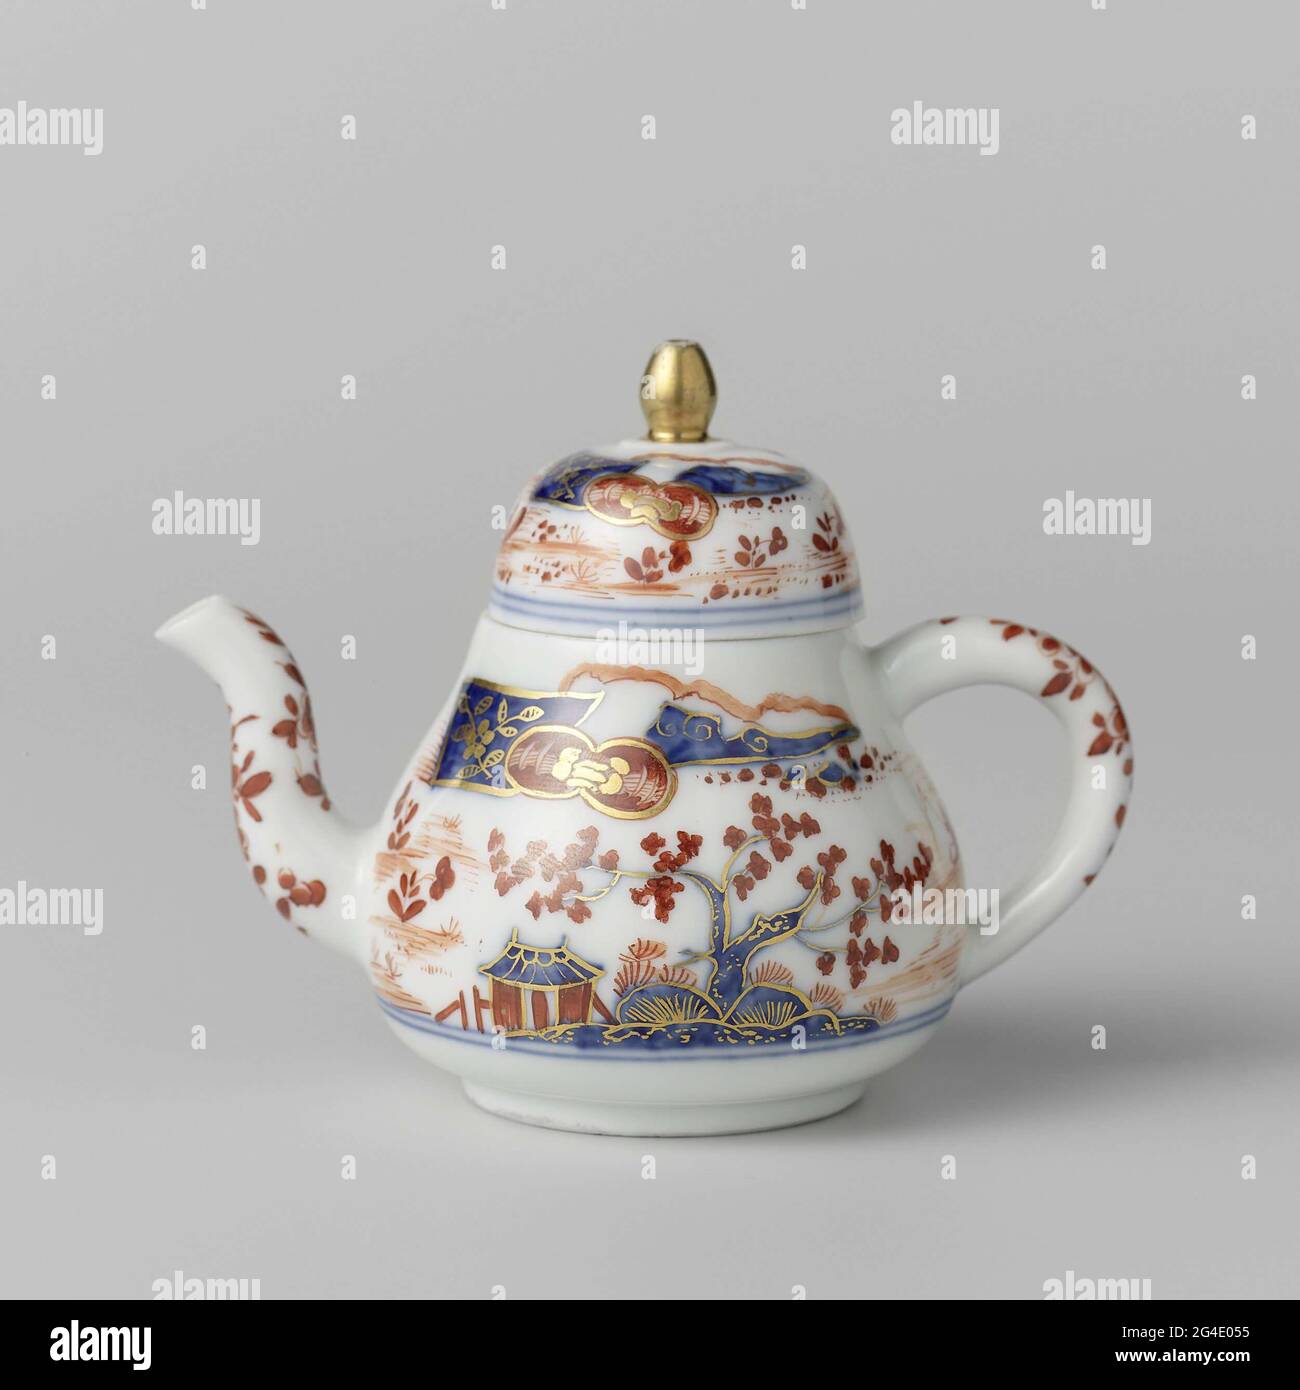 . Teapot with lid of painted porcelain. The teapot is painted in the Imii style with trees, houses and a fisherman in a boat. The teapot has been marked. Stock Photo